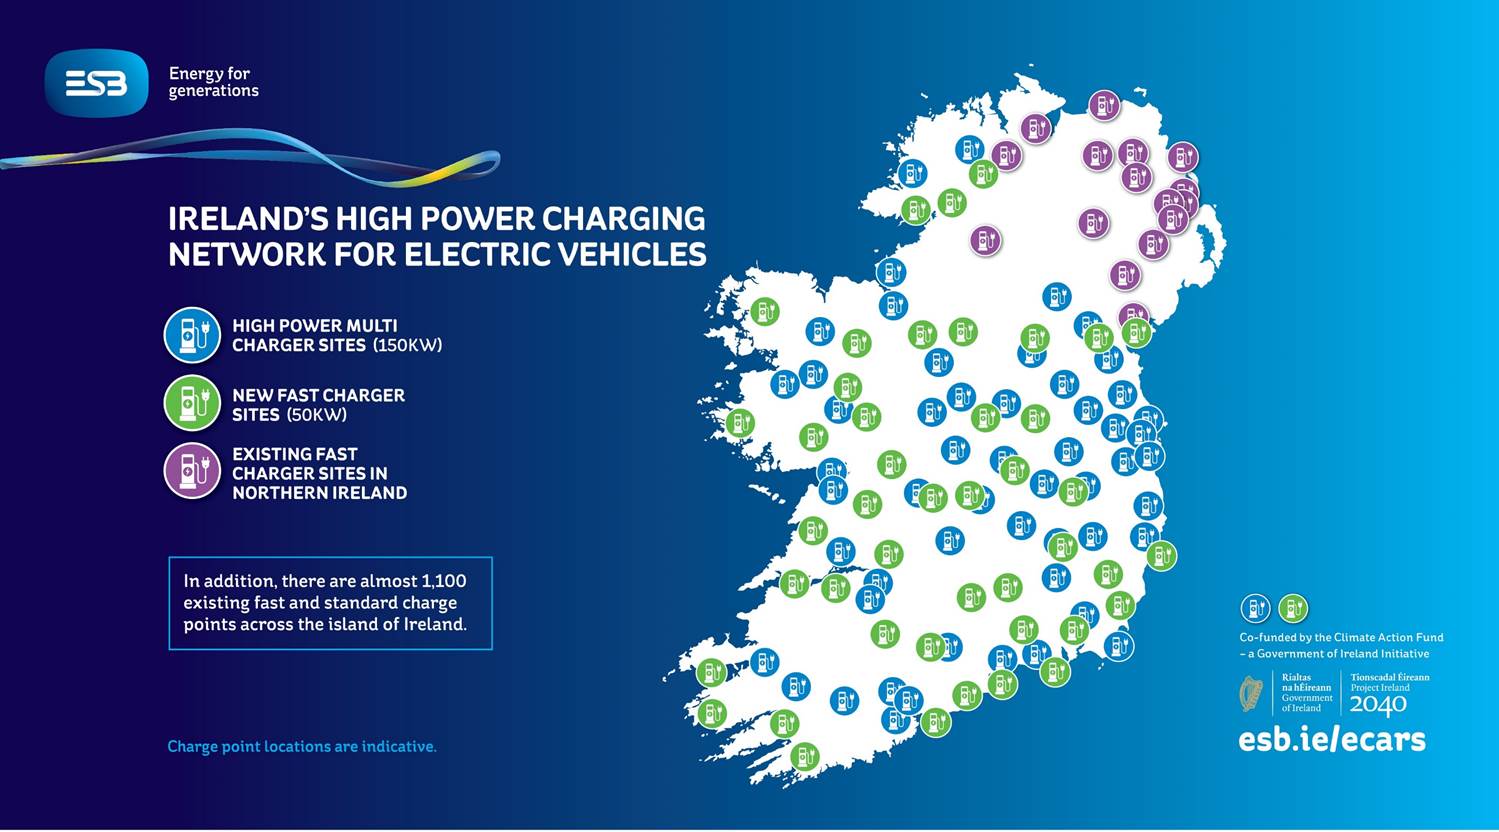 WHERE AND HOW IS AN ELECTRIC CAR CHARGED?